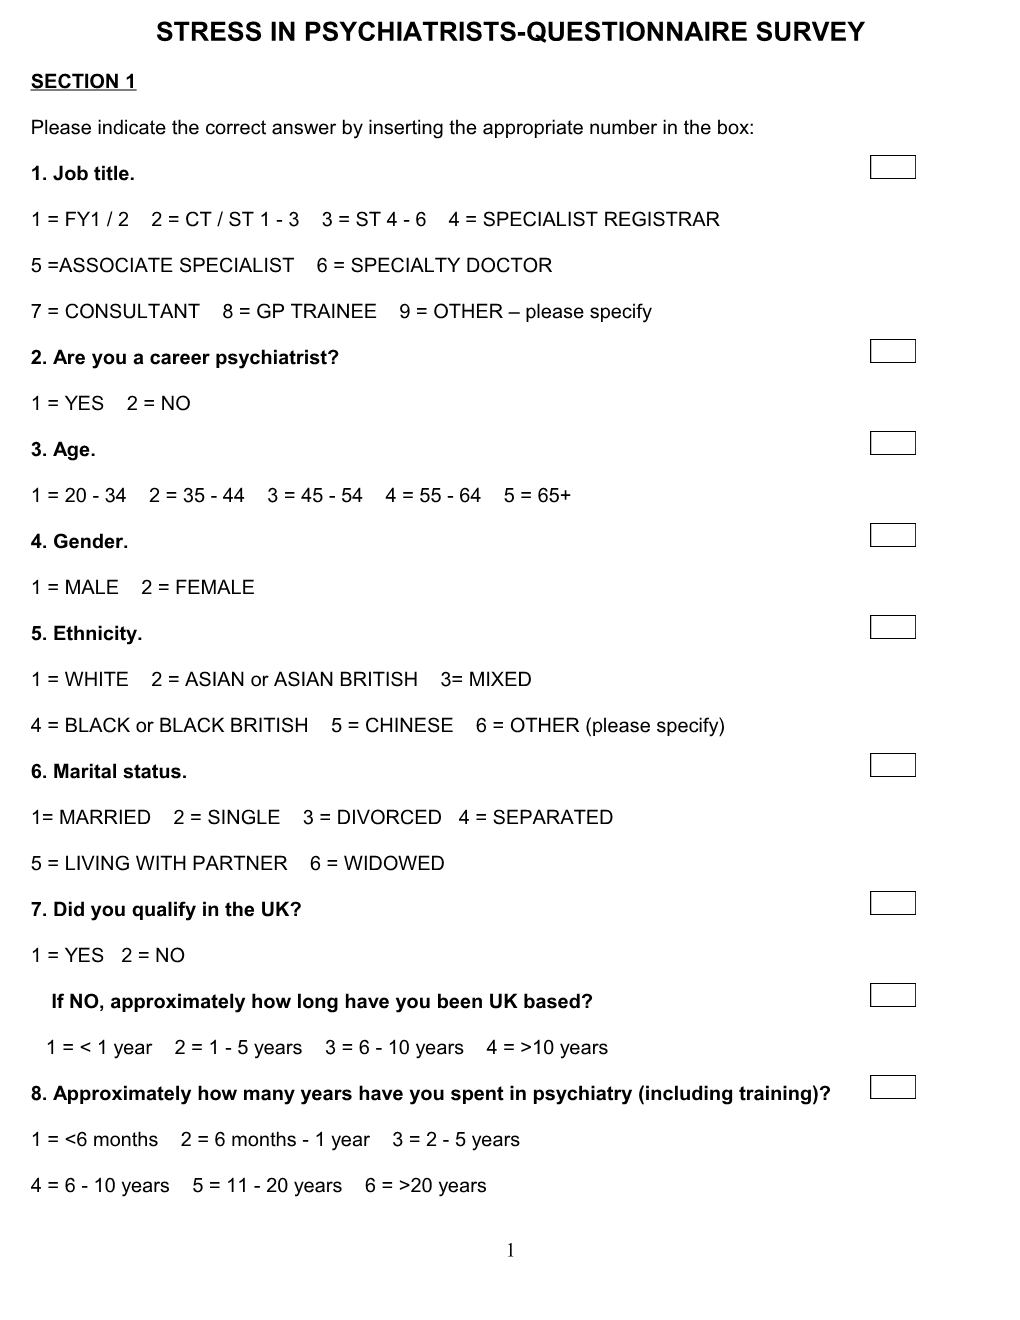 Stress Questionnaire for Psychiatrists